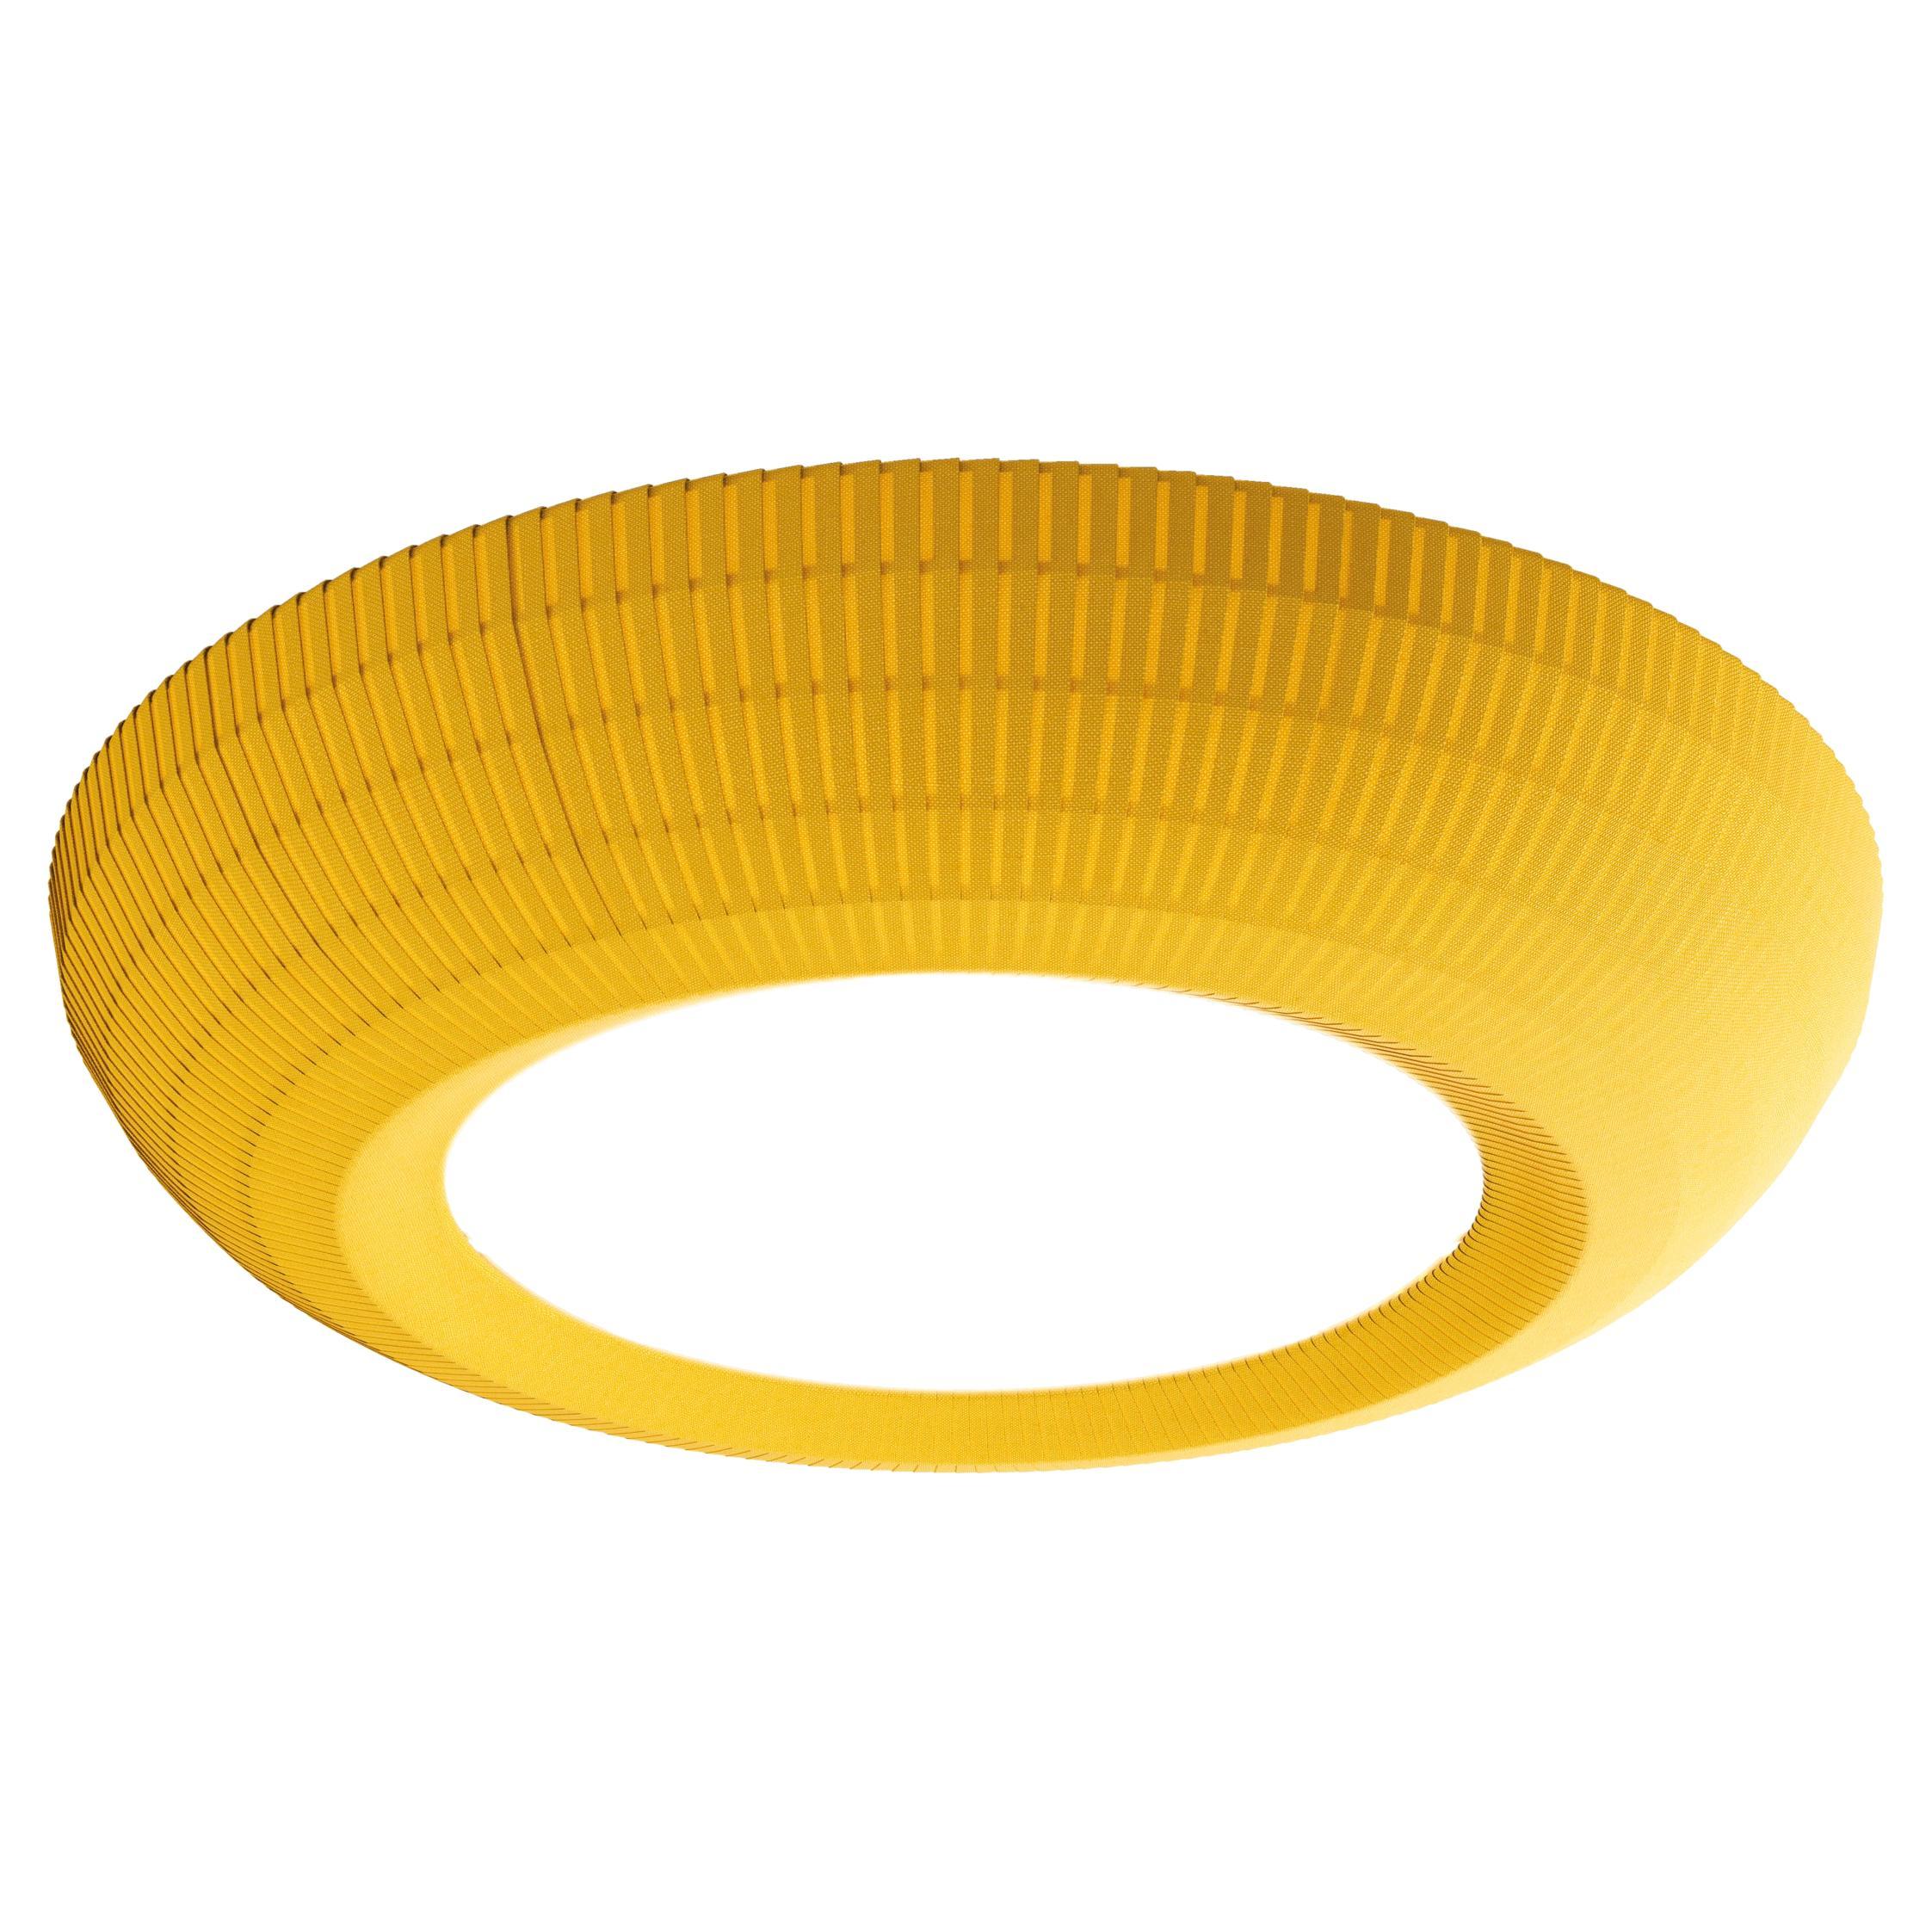 Axolight Bell Large Ceiling Lamp in Yellow by Manuel & Vanessa Vivian